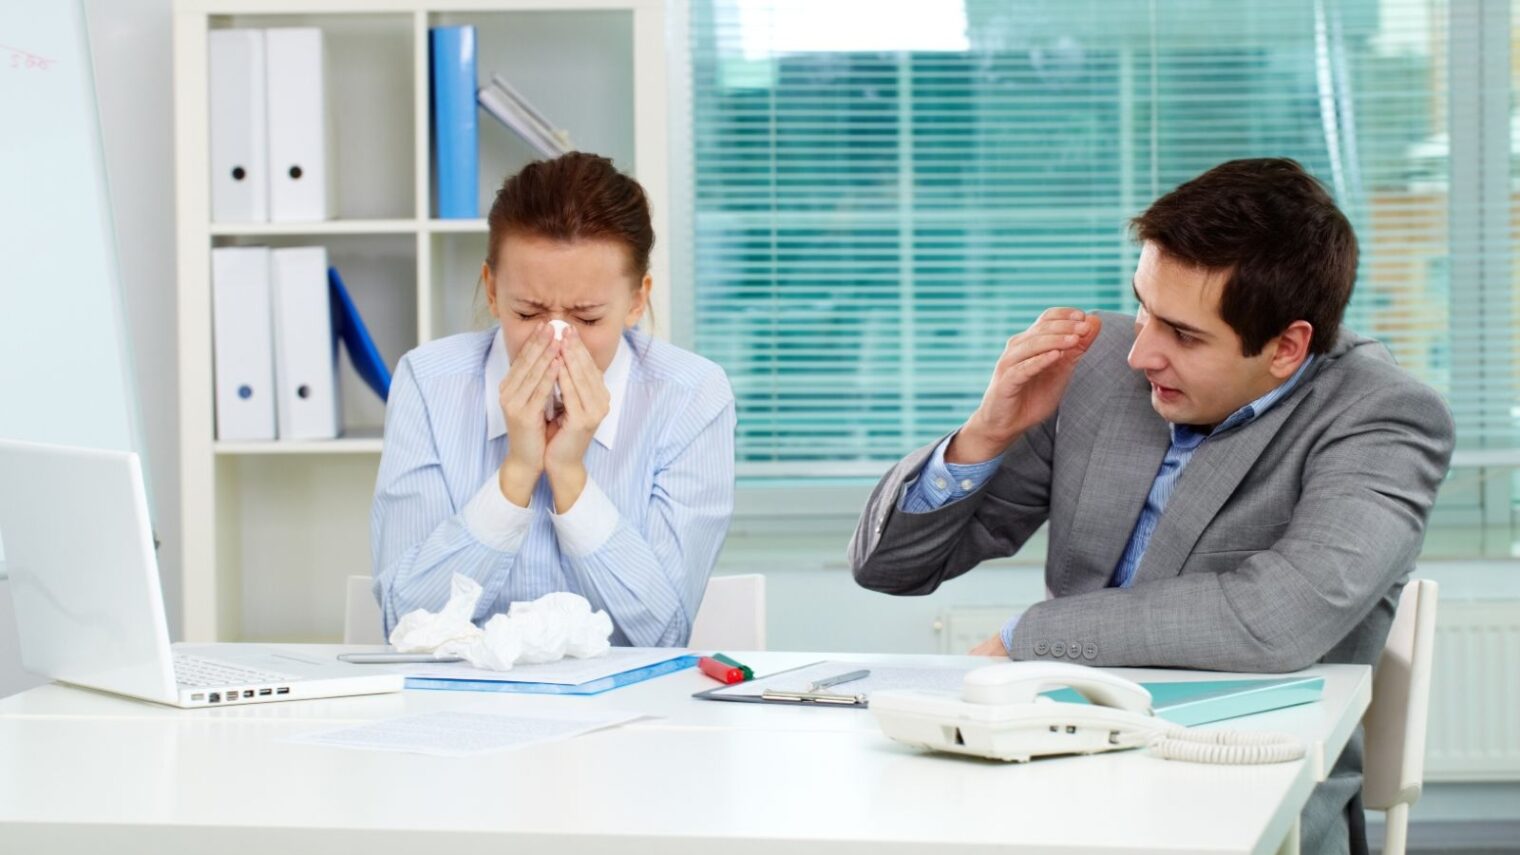 Feeling sick at work? Take a hint from your body and go home. Image via Shutterstock.com